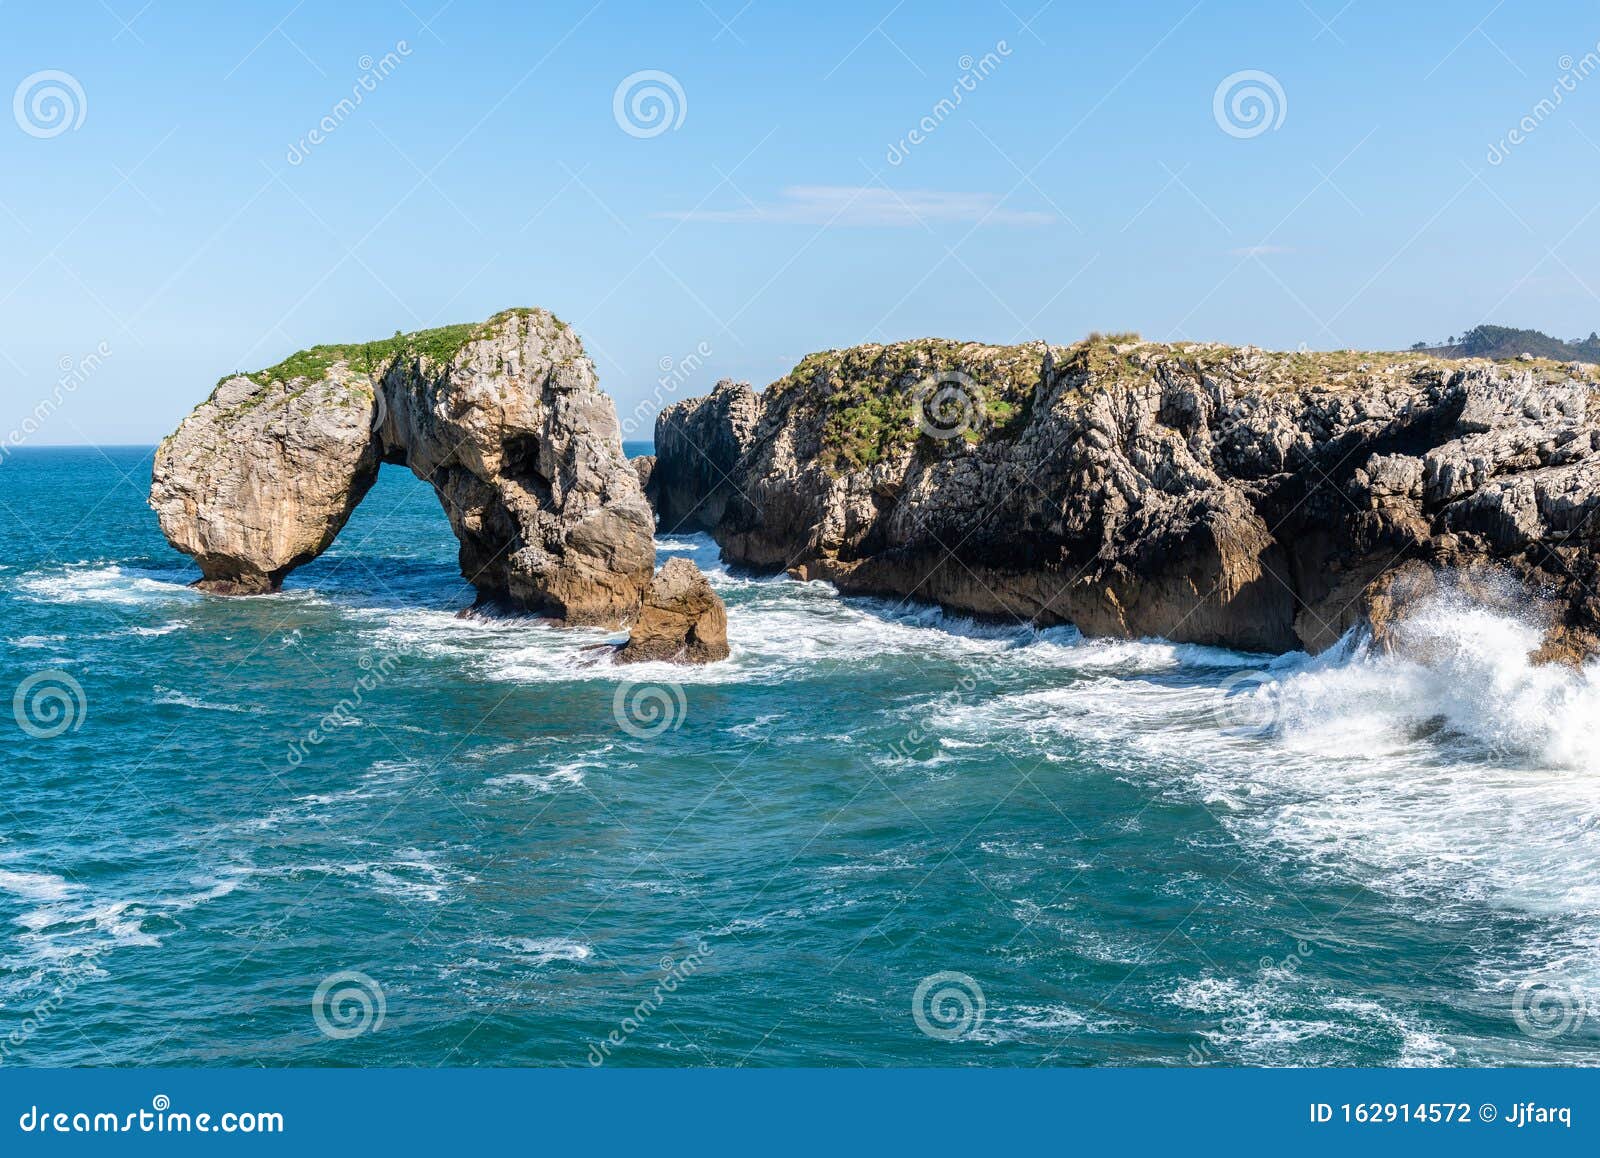 scenic view of sea against blue sky in rocky coast